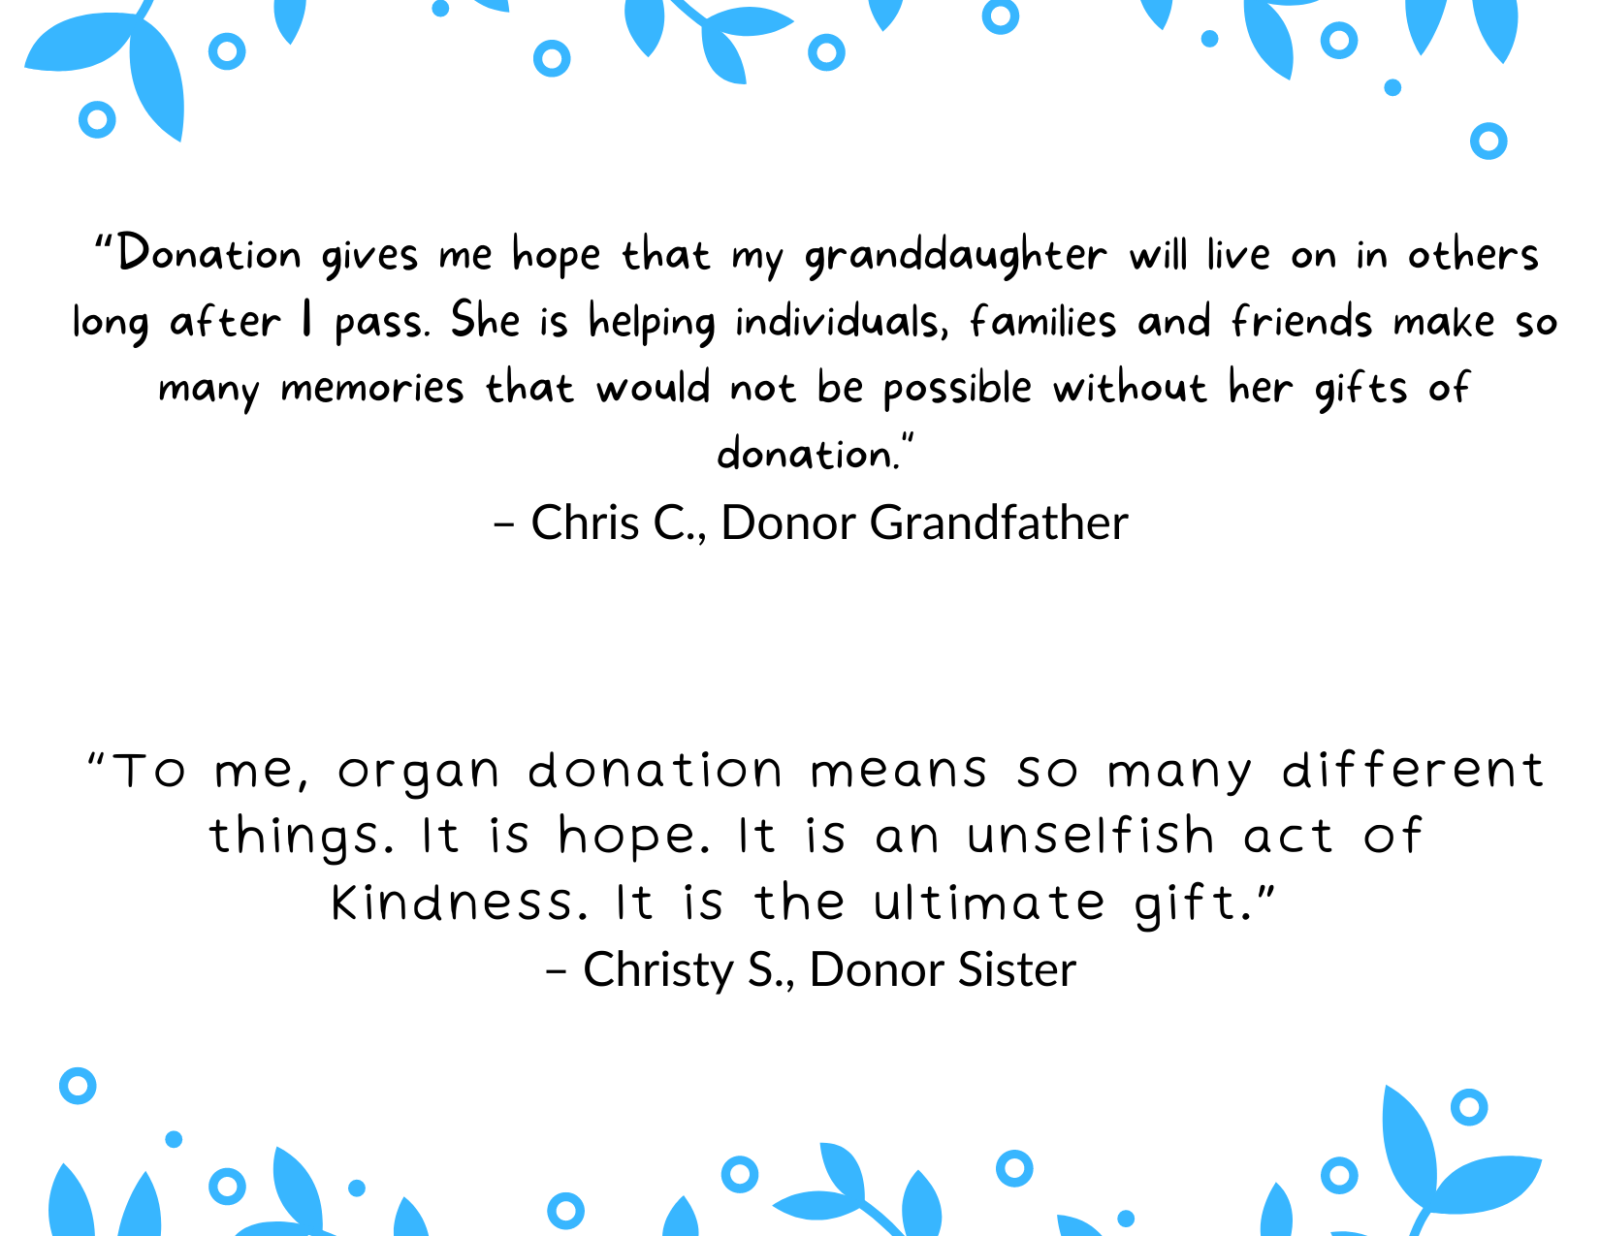 Quotes from donor family members